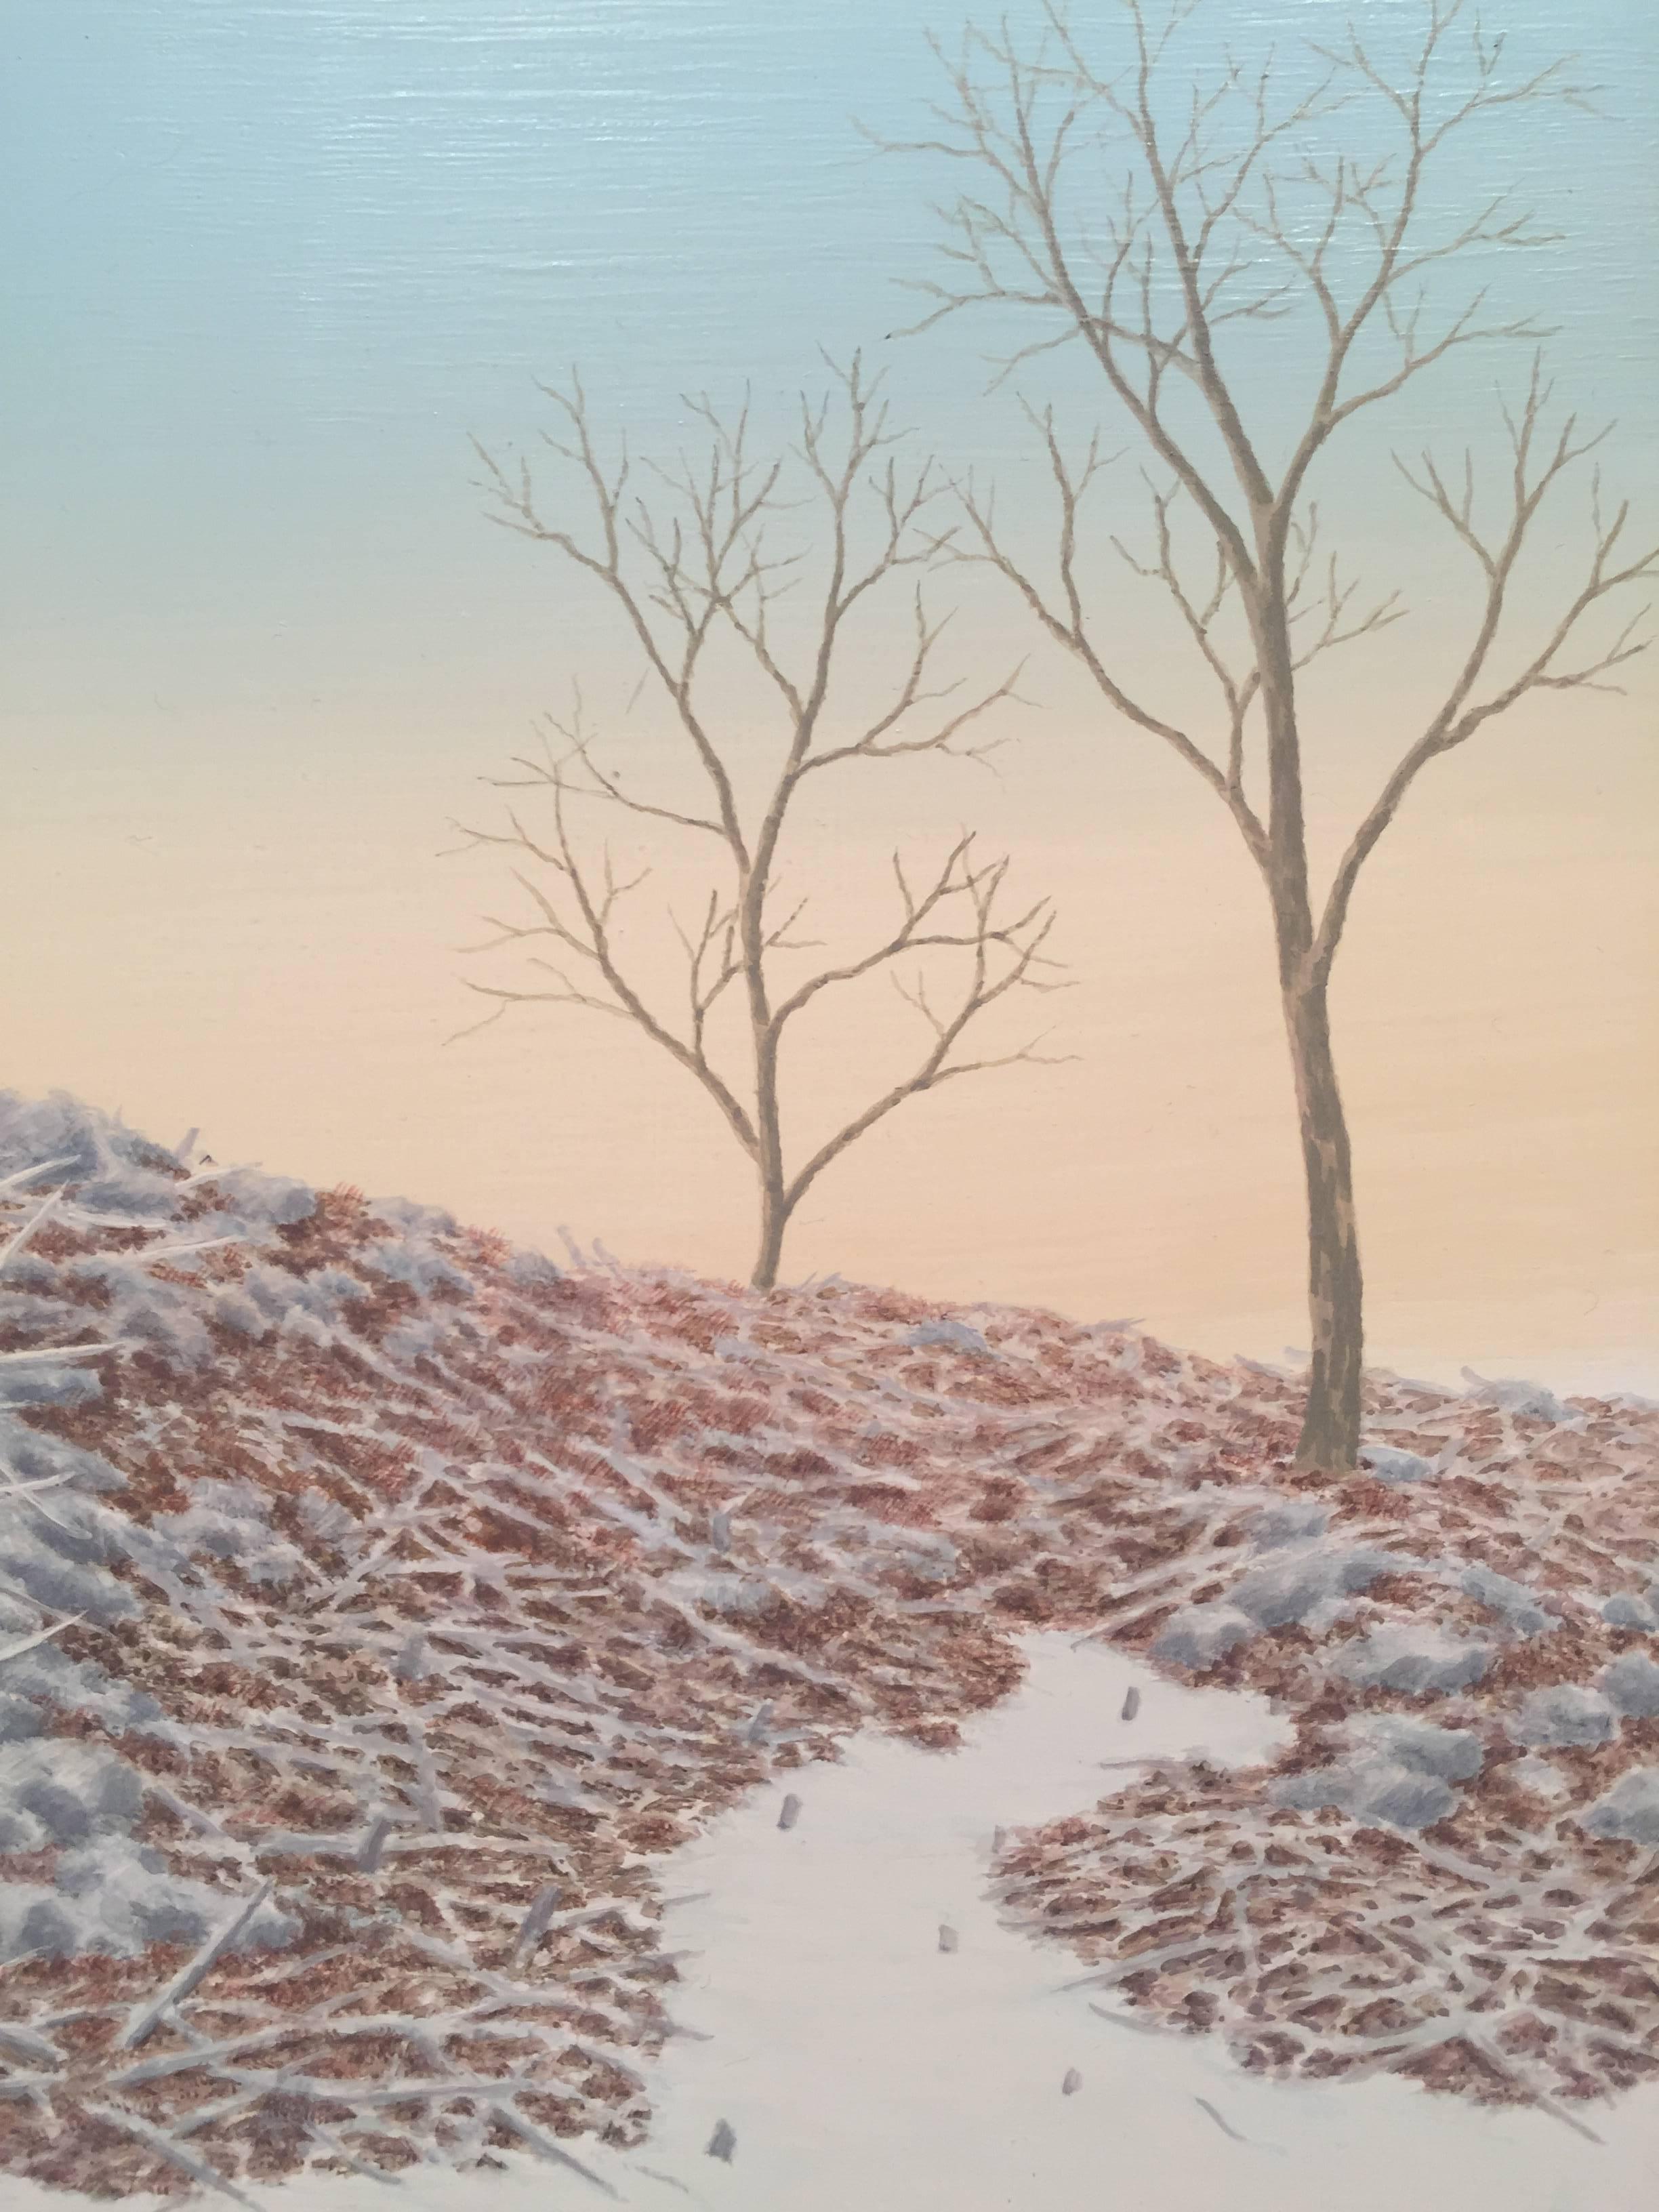 Alan Bray, Clearcut with Wildlife Trees, Casein landscape painting, 2015 2